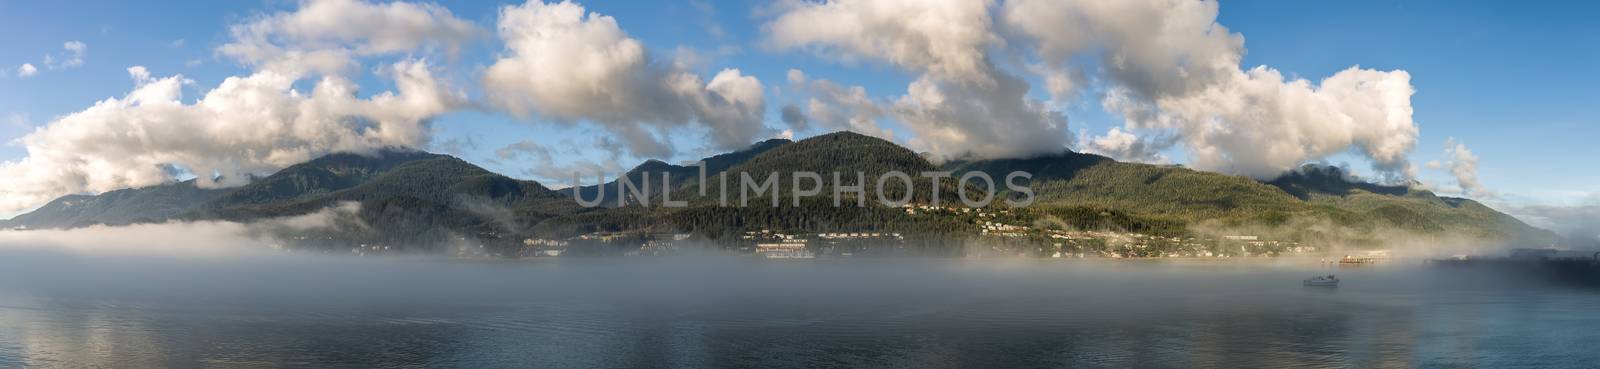 Panoramic shot of mountains covered with clouds and fog in Gastineau Channel, Juneau, Alaska. Golden hour. Blue cloudy sky as a background and boat sailing in the fog in the foreground by DamantisZ